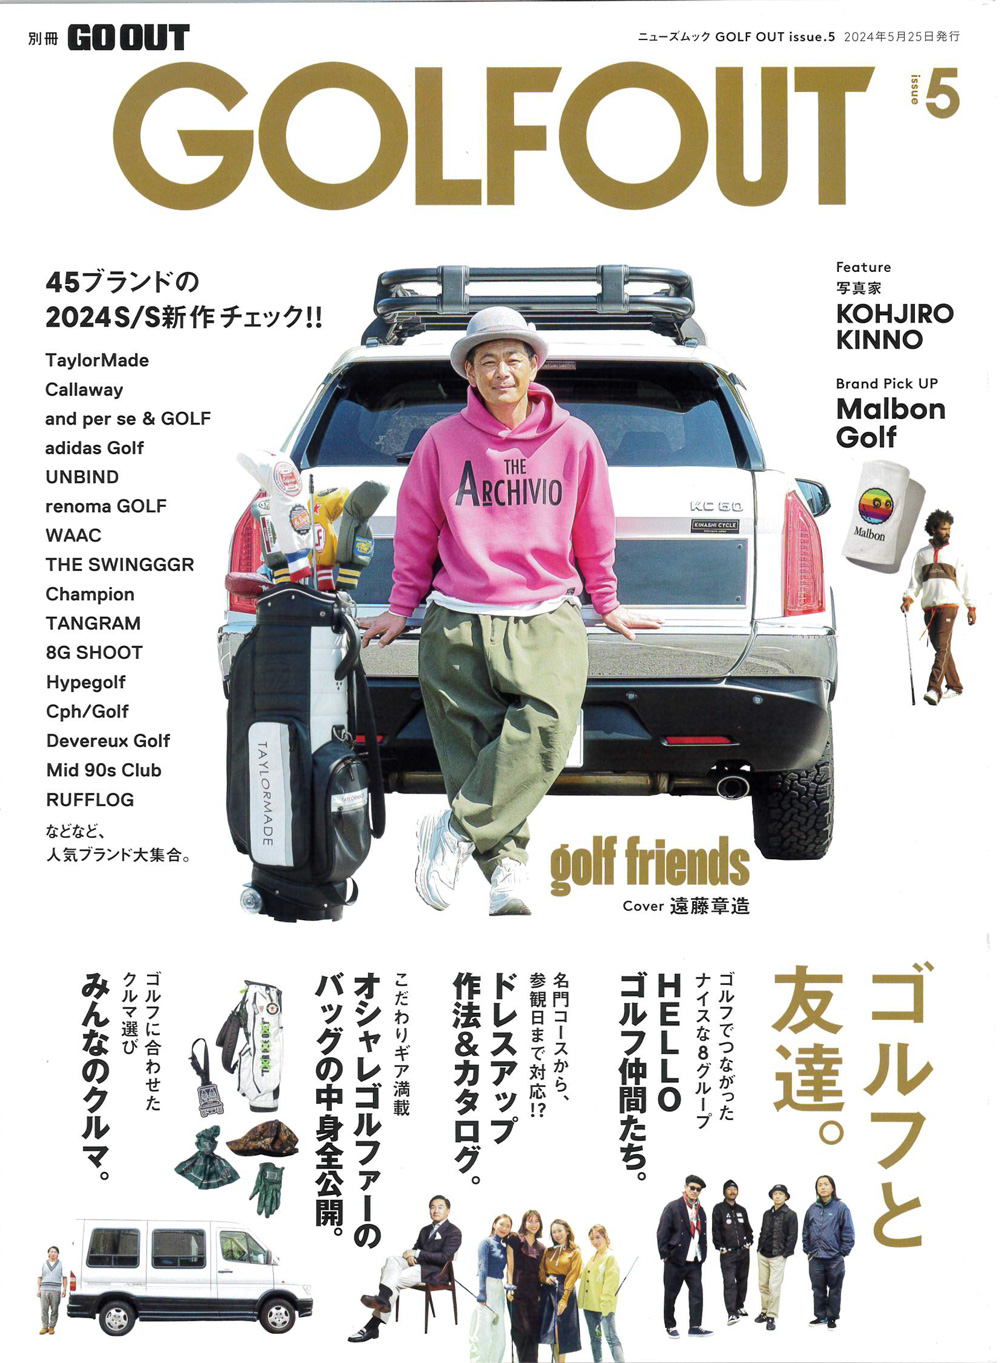 GOLF OUT５月号掲載:ELECTRIC